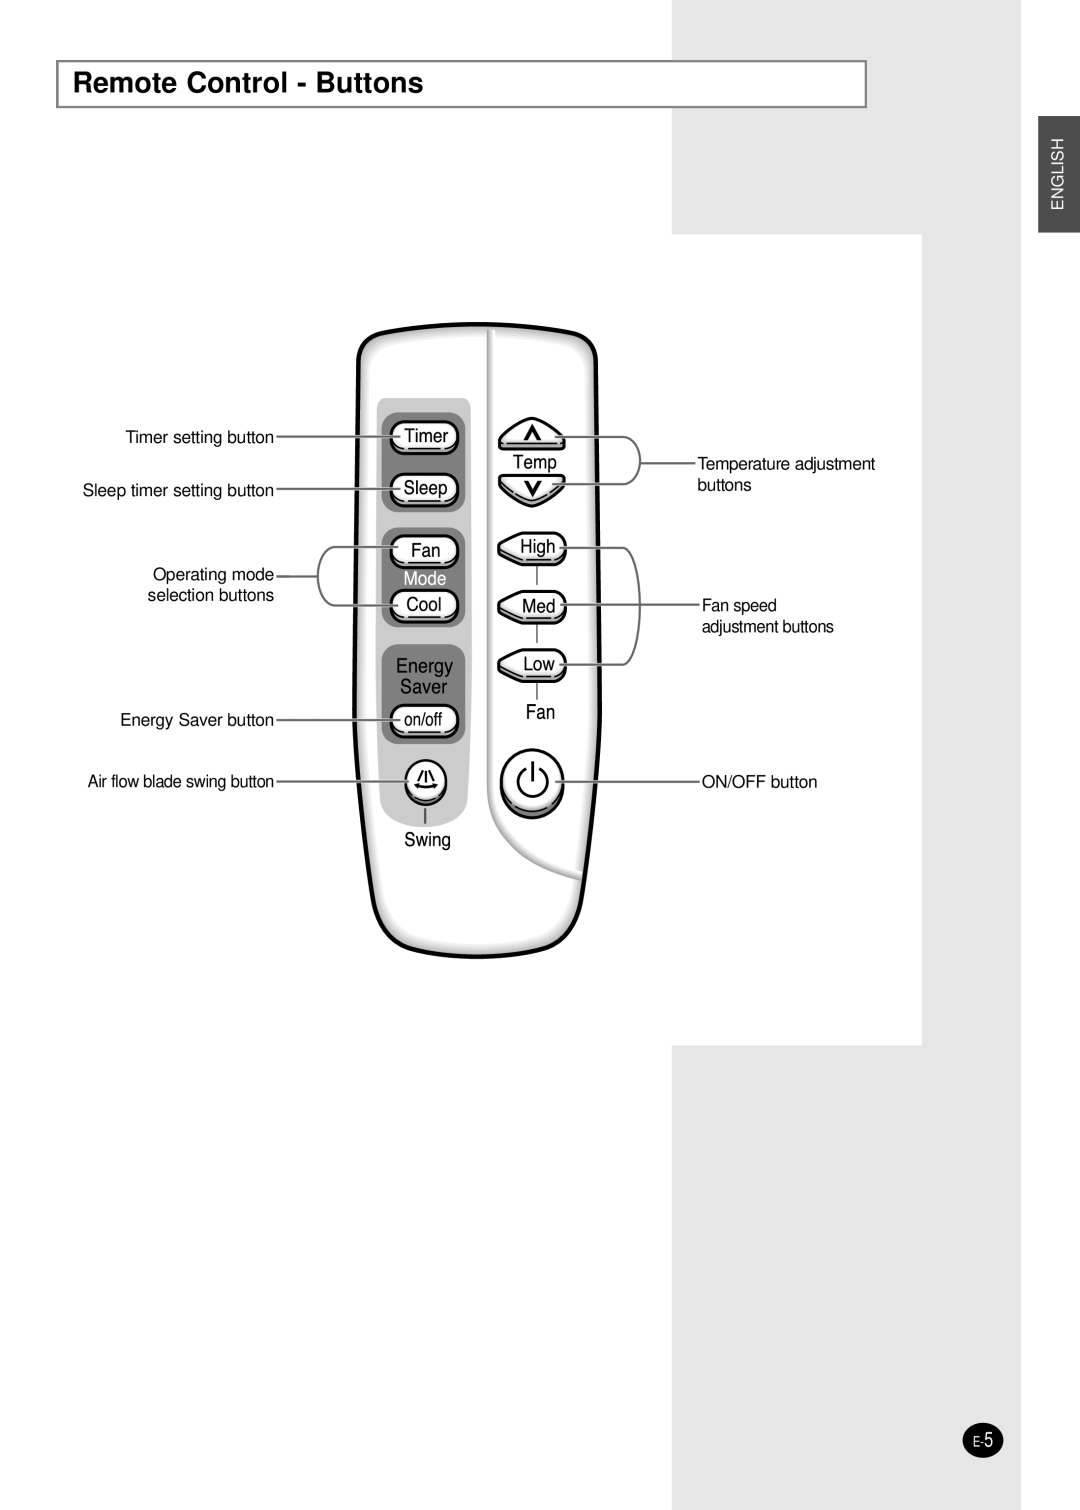 Samsung AW09FASAA Remote Control - Buttons, Timer setting button Sleep timer setting button, English, Energy Saver button 